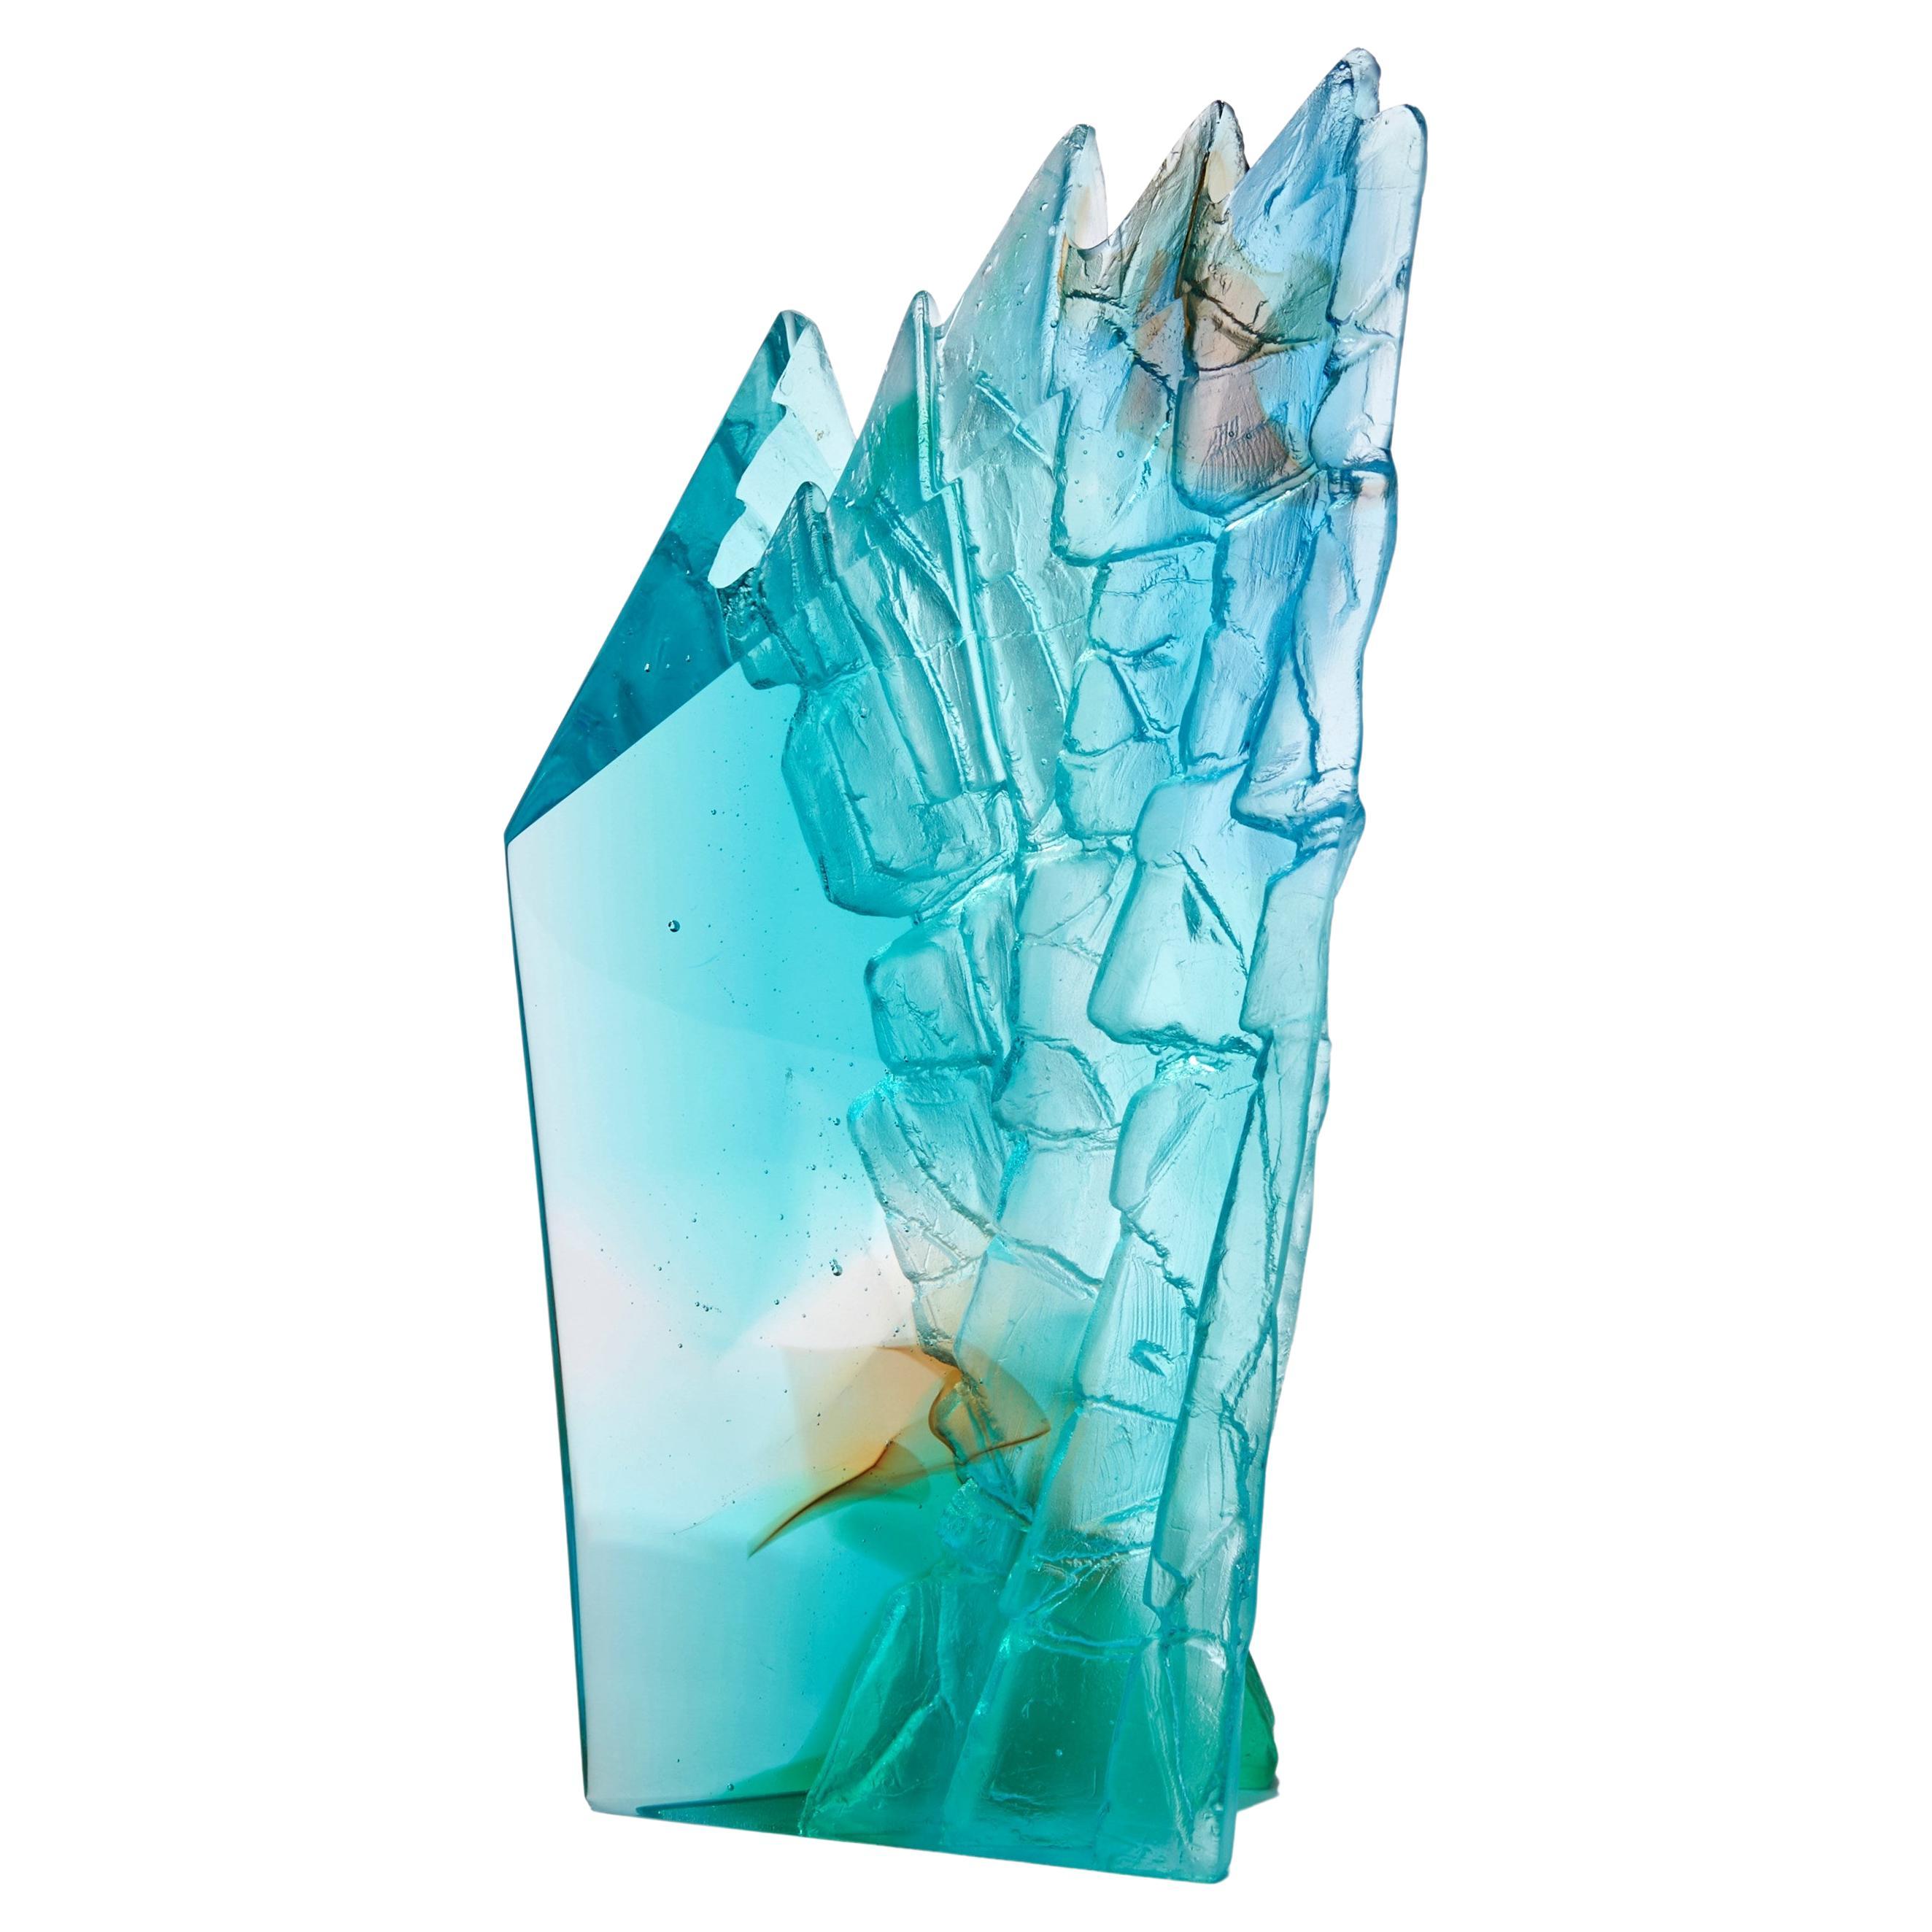 Turquoise Cliff II, a Turquoise & Jade Cast Glass Sculpture by Crispian Heath